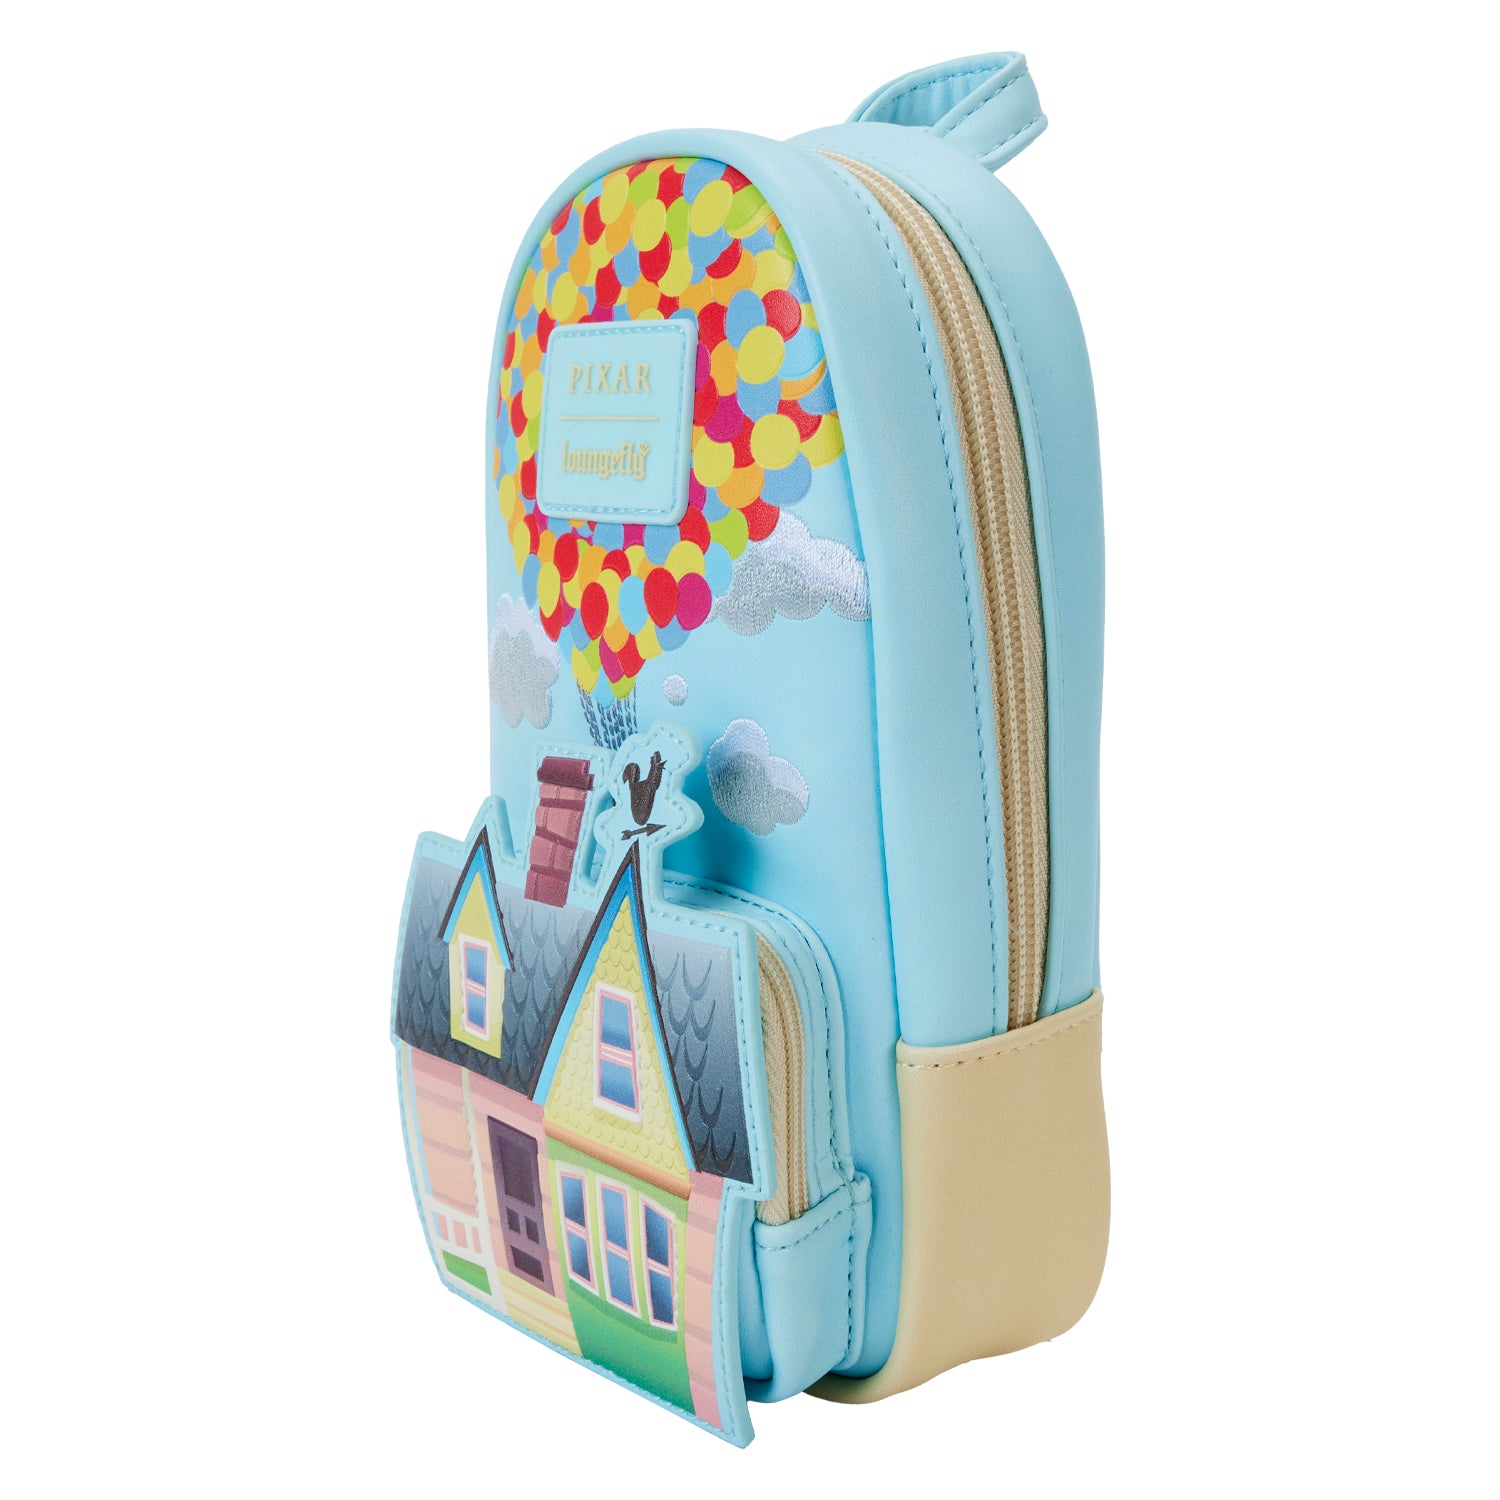 Loungefly Pixar Up 15th Anniversary Balloon House Mini Backpack Pencil Case